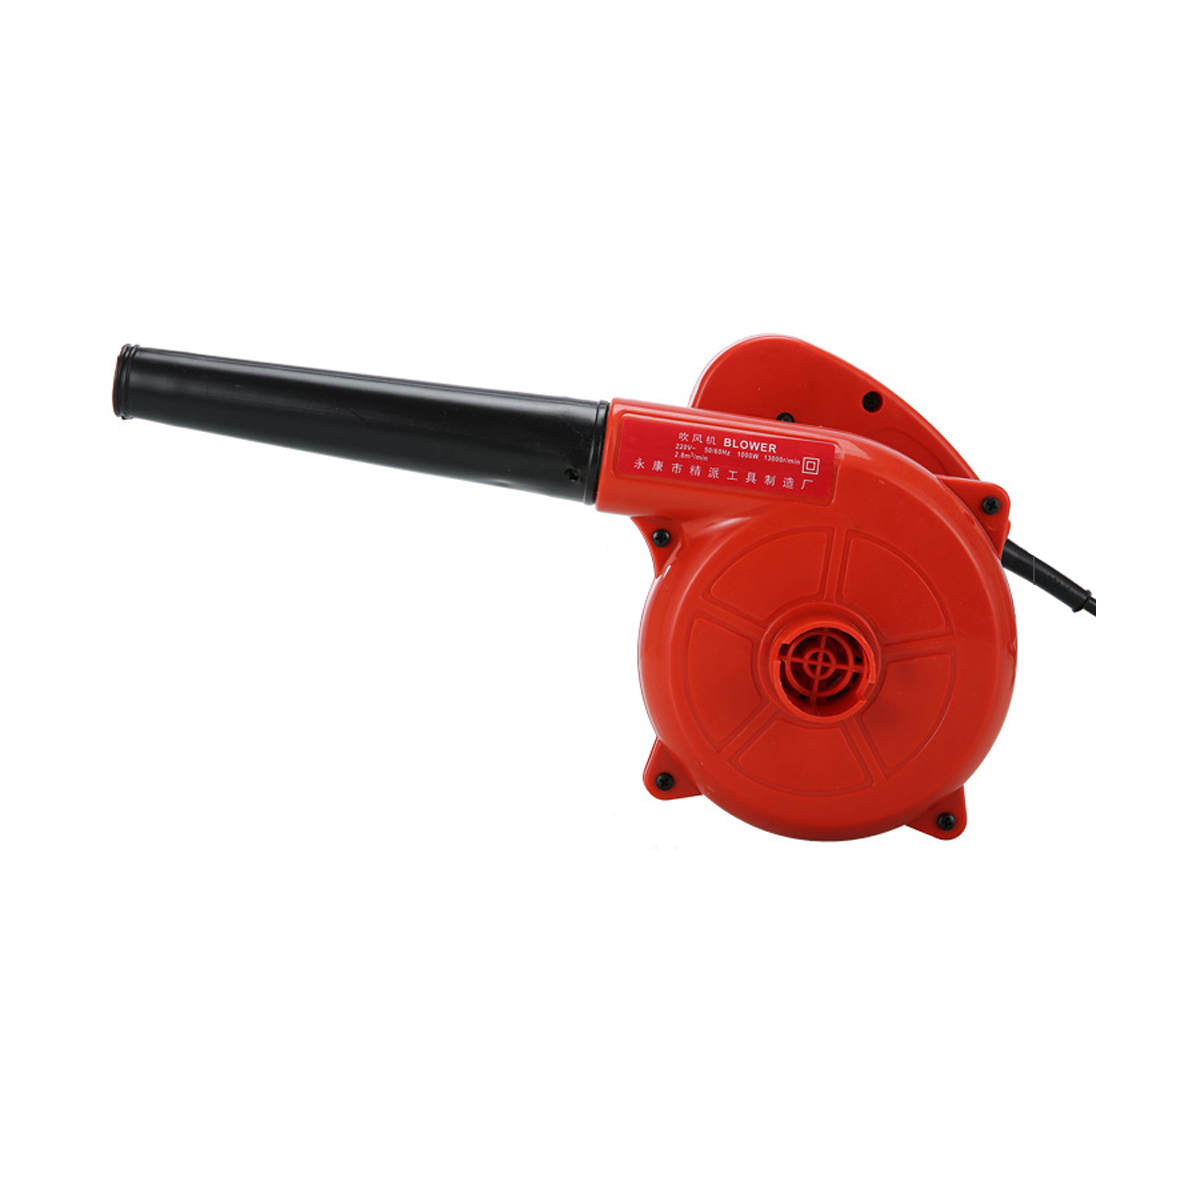 220V-500W-Electric-Air-Blower-Handheld-Computer-Cleaning-Machine-Home-Car-Dust-Vacuum-Cleaner-W-Mask-1734959-7